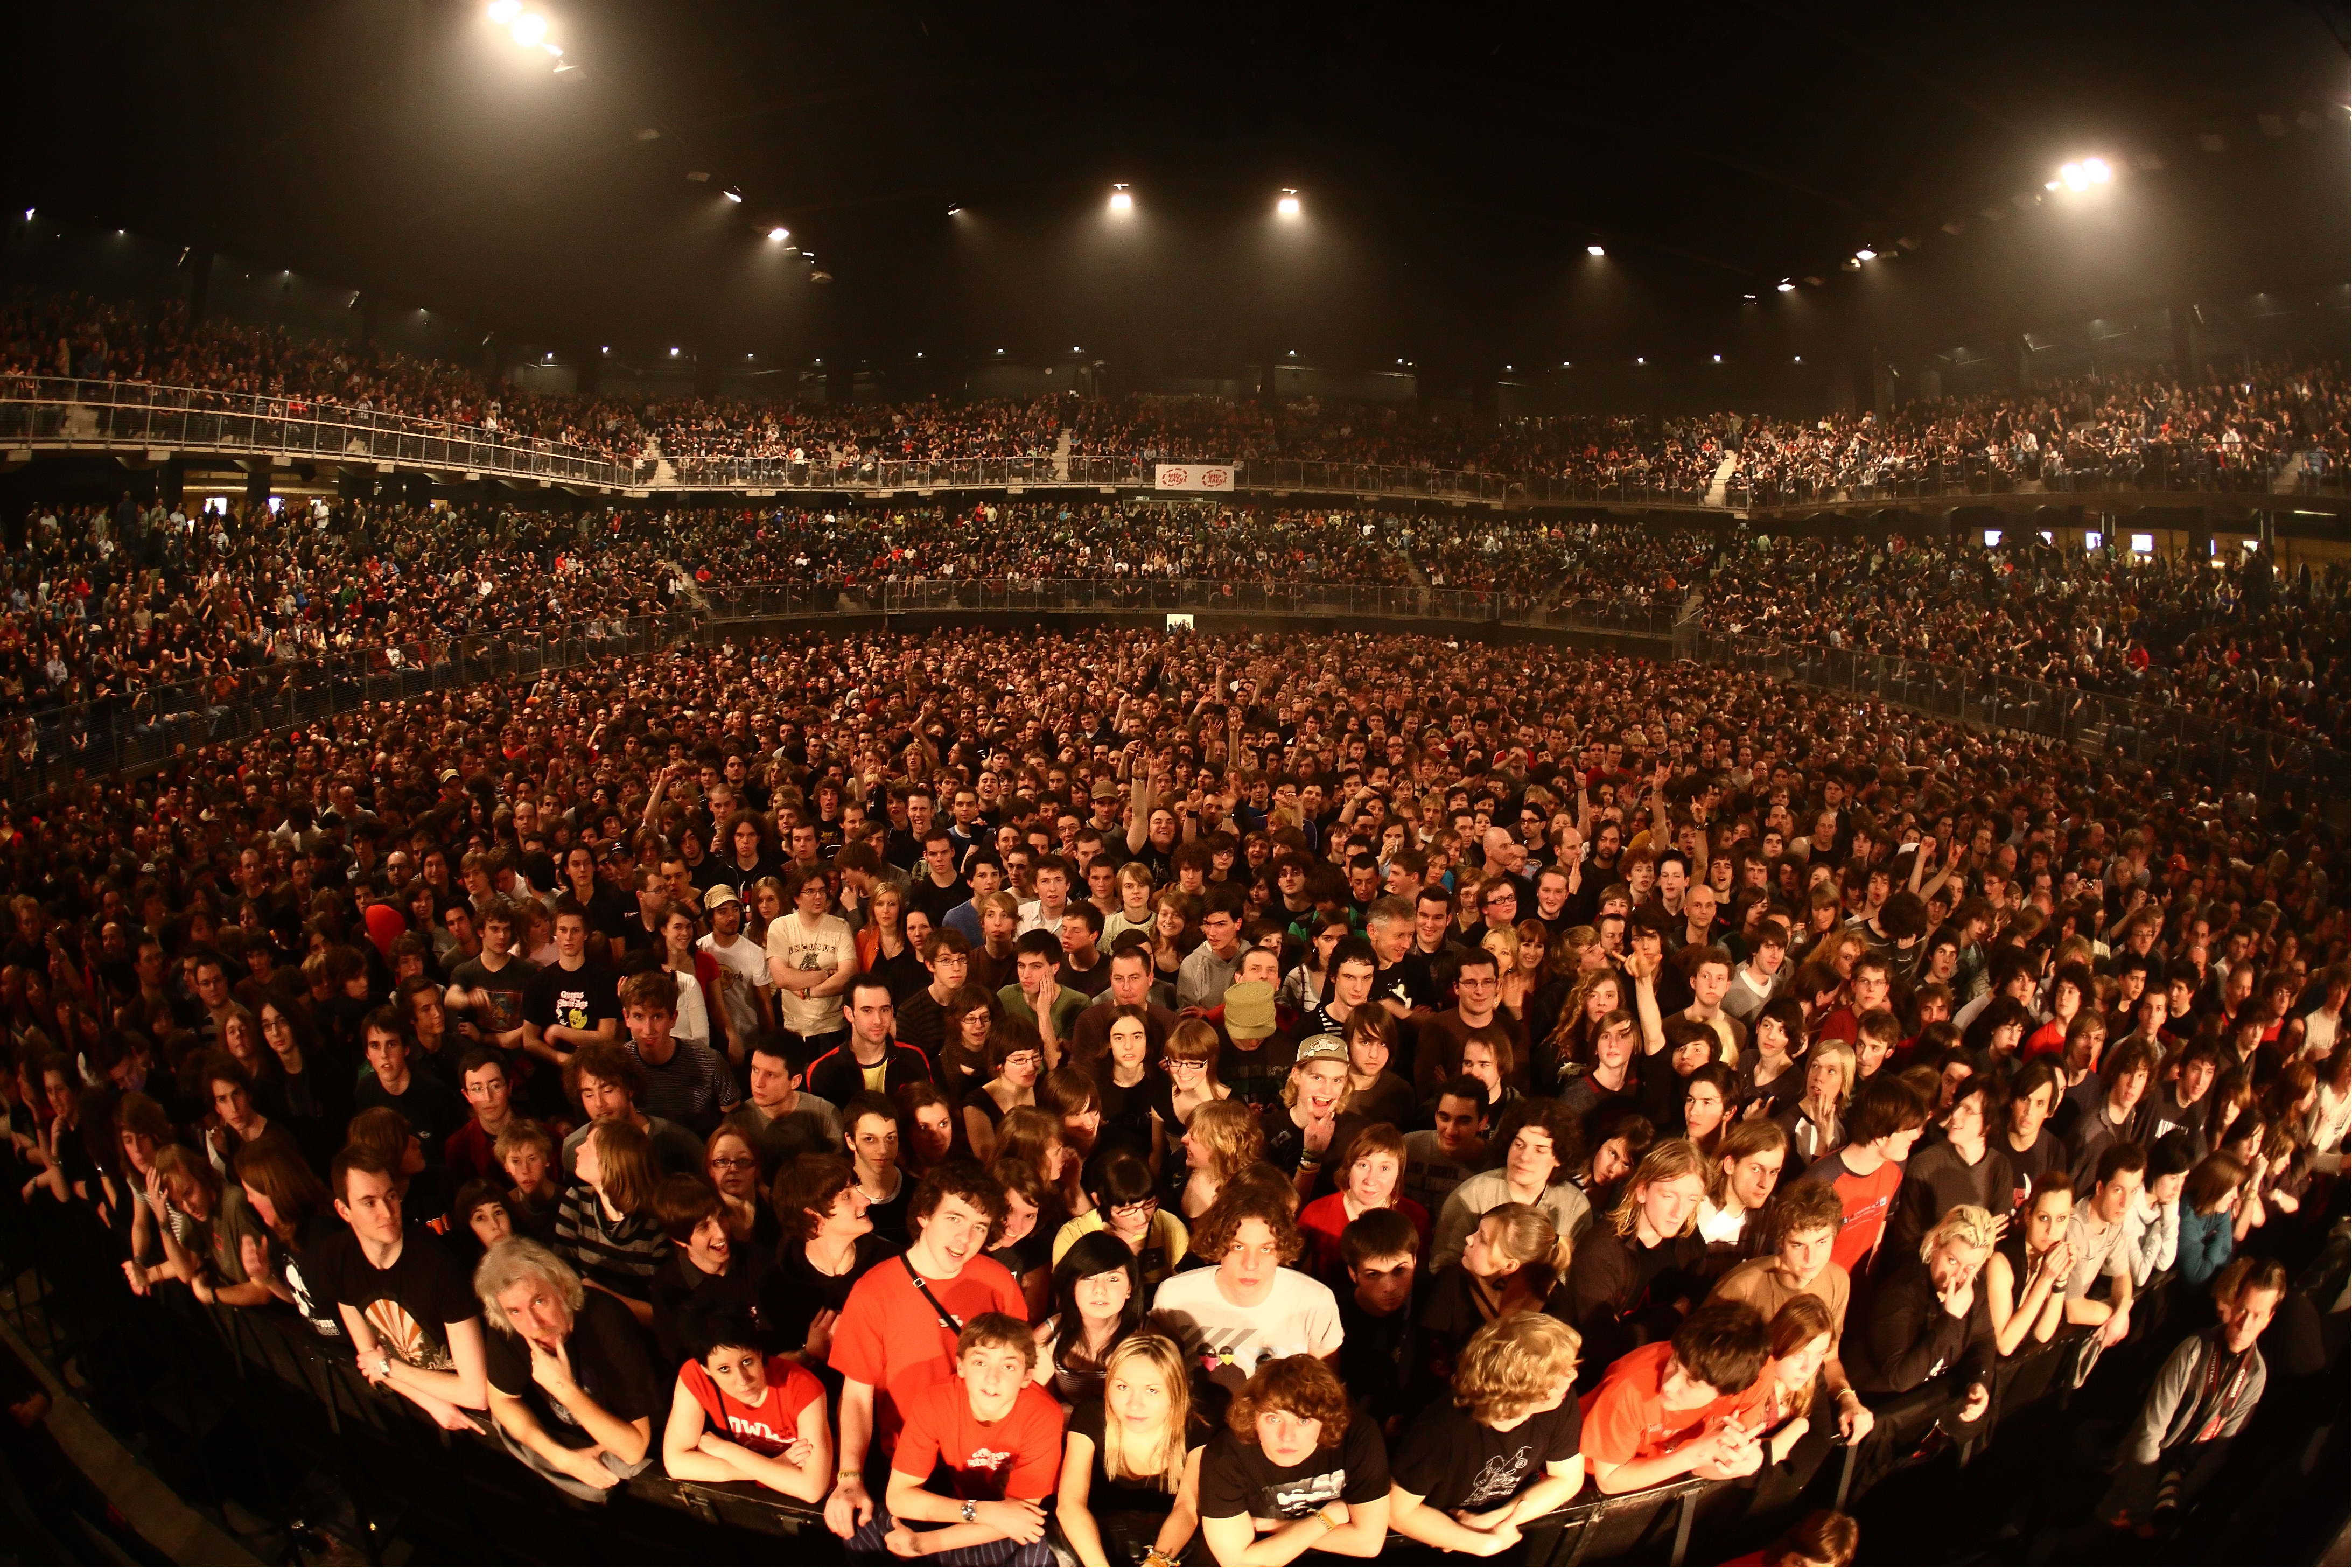 Concert Crowd in Amsterdam